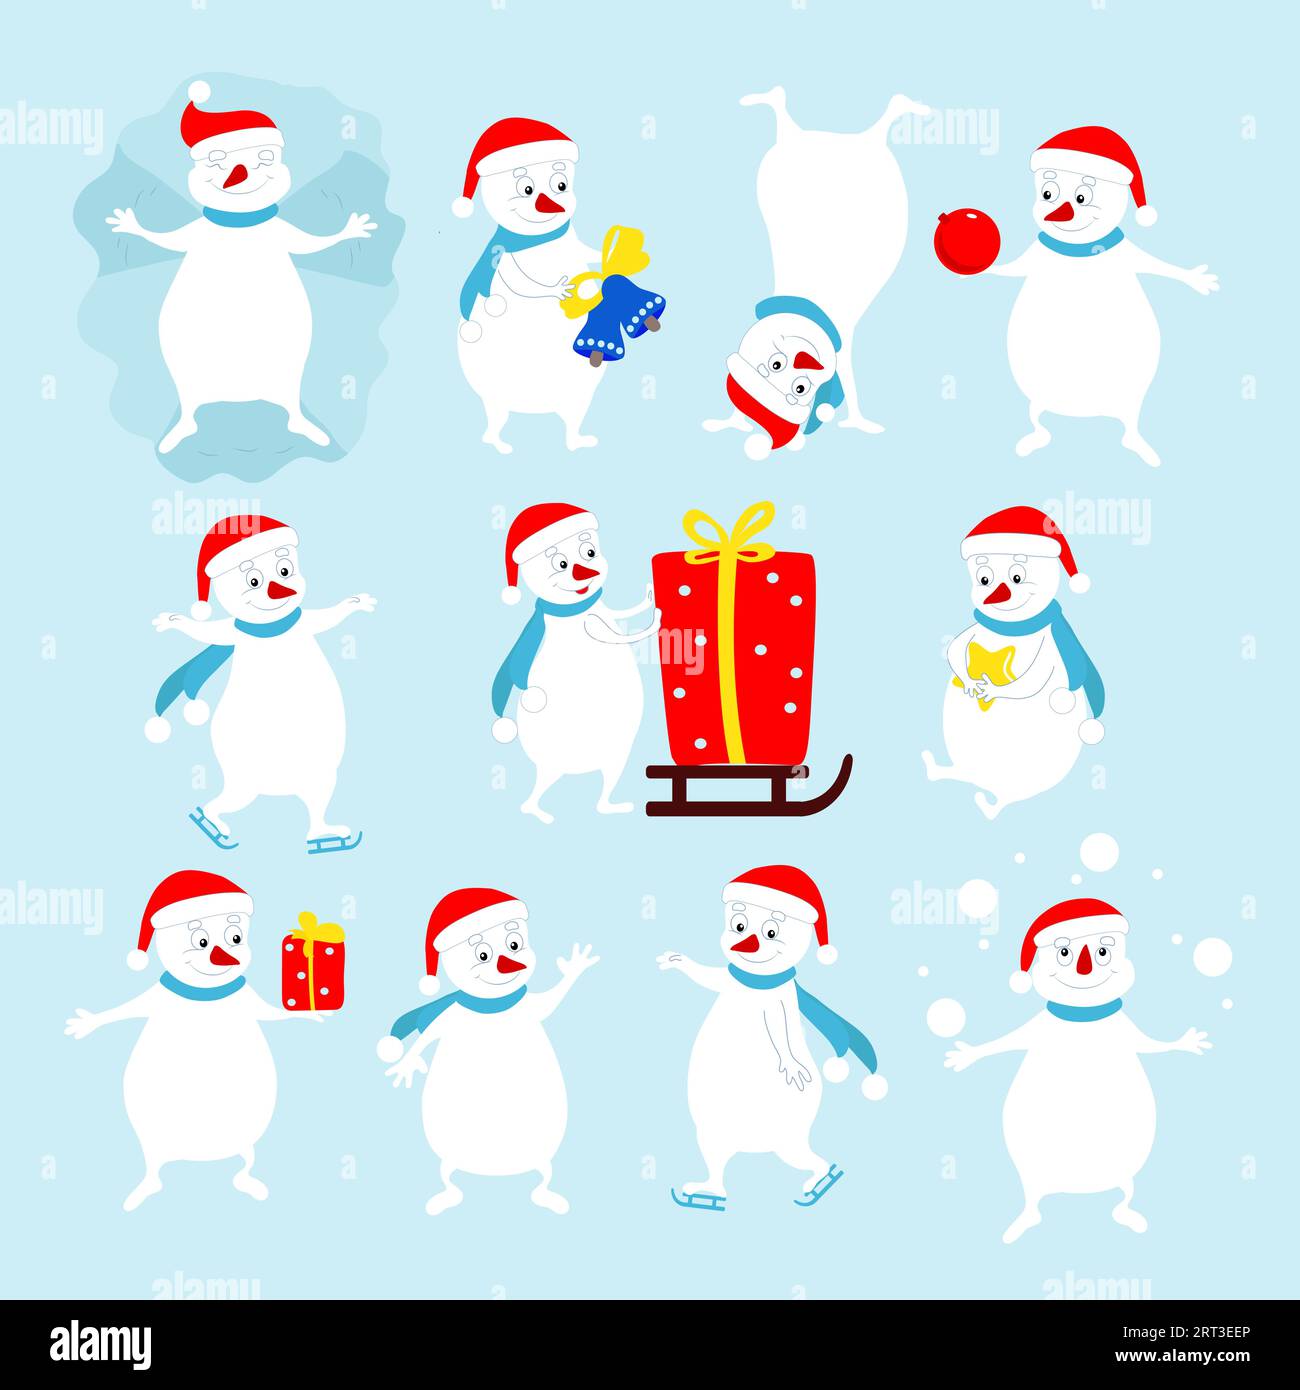 Set of snowmen in different figures and poses. Winter characters make a snow angel, skate, bring gifts. Stock Vector